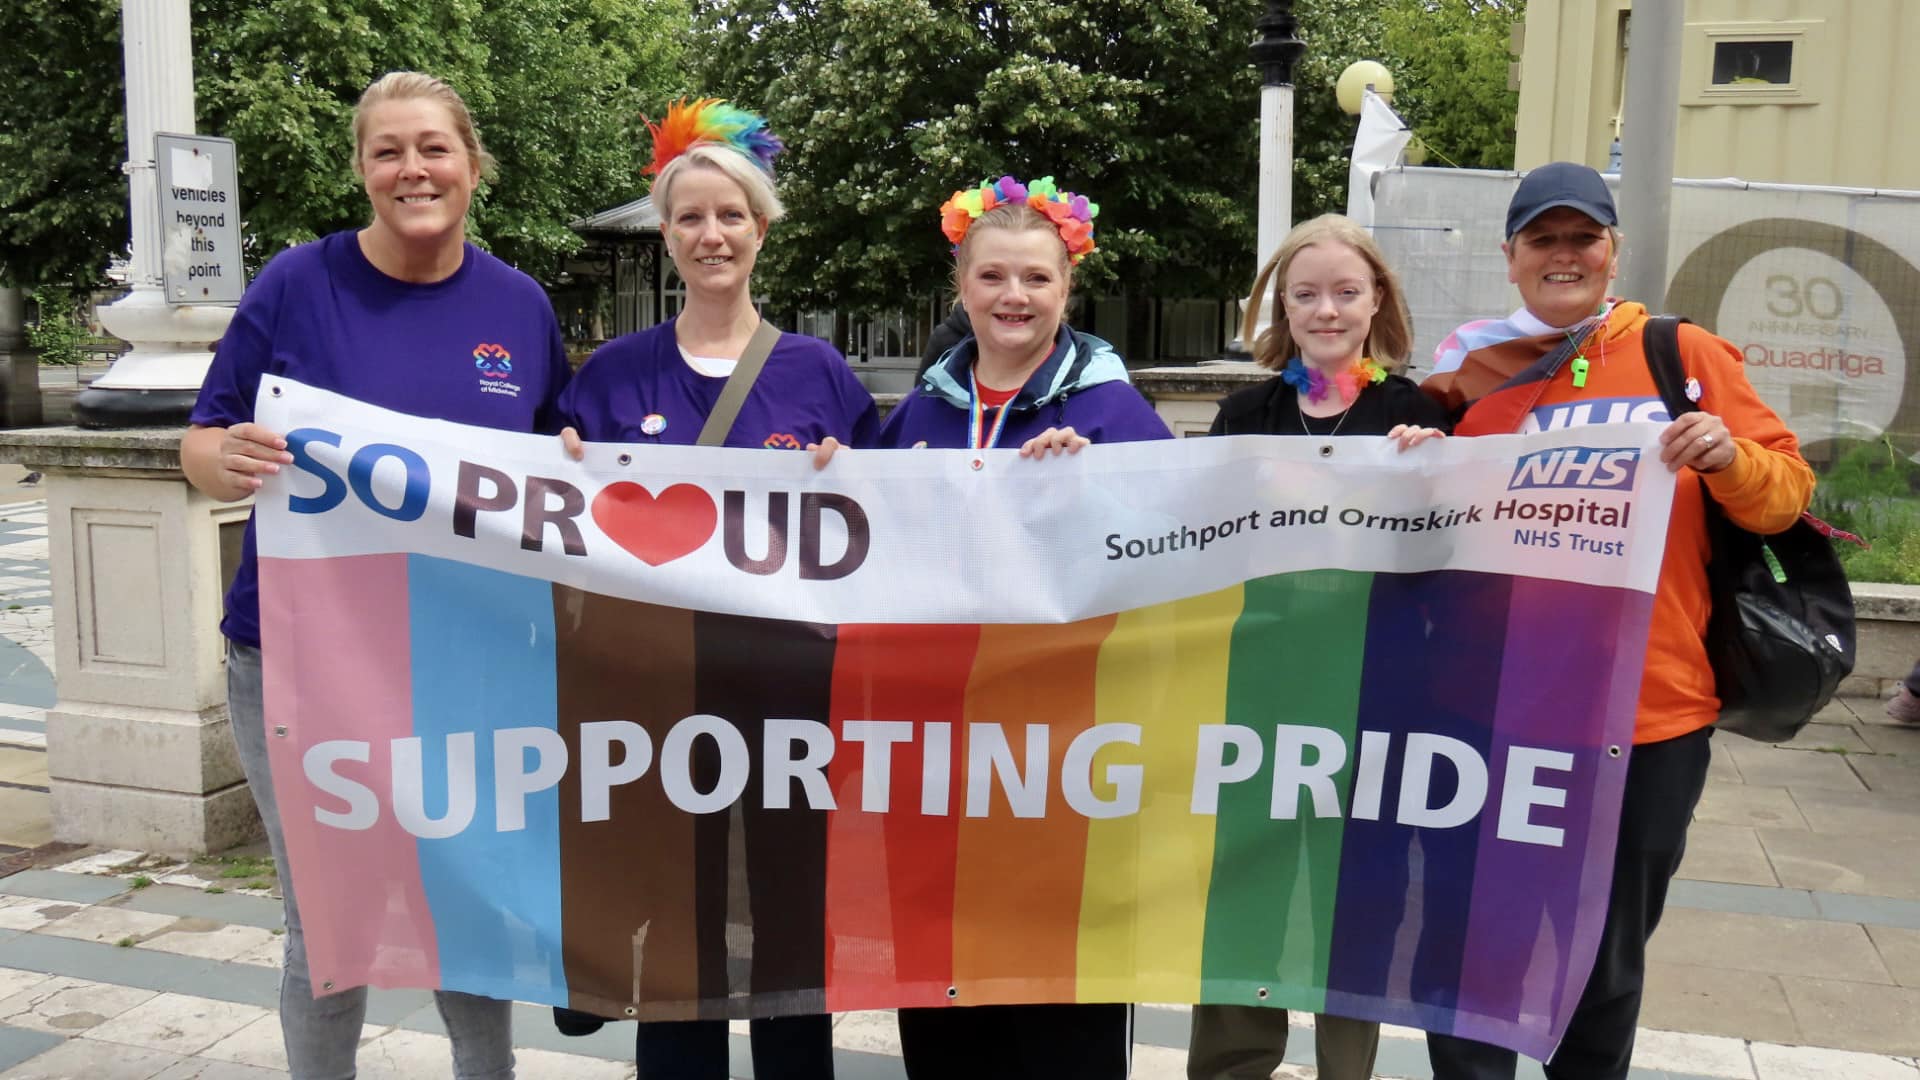 The Sefton Pride parade in Southport. NHS staff from Southport Hospital and Ormskirk Hospital. Photo by Andrew Brown Stand Up For Southport